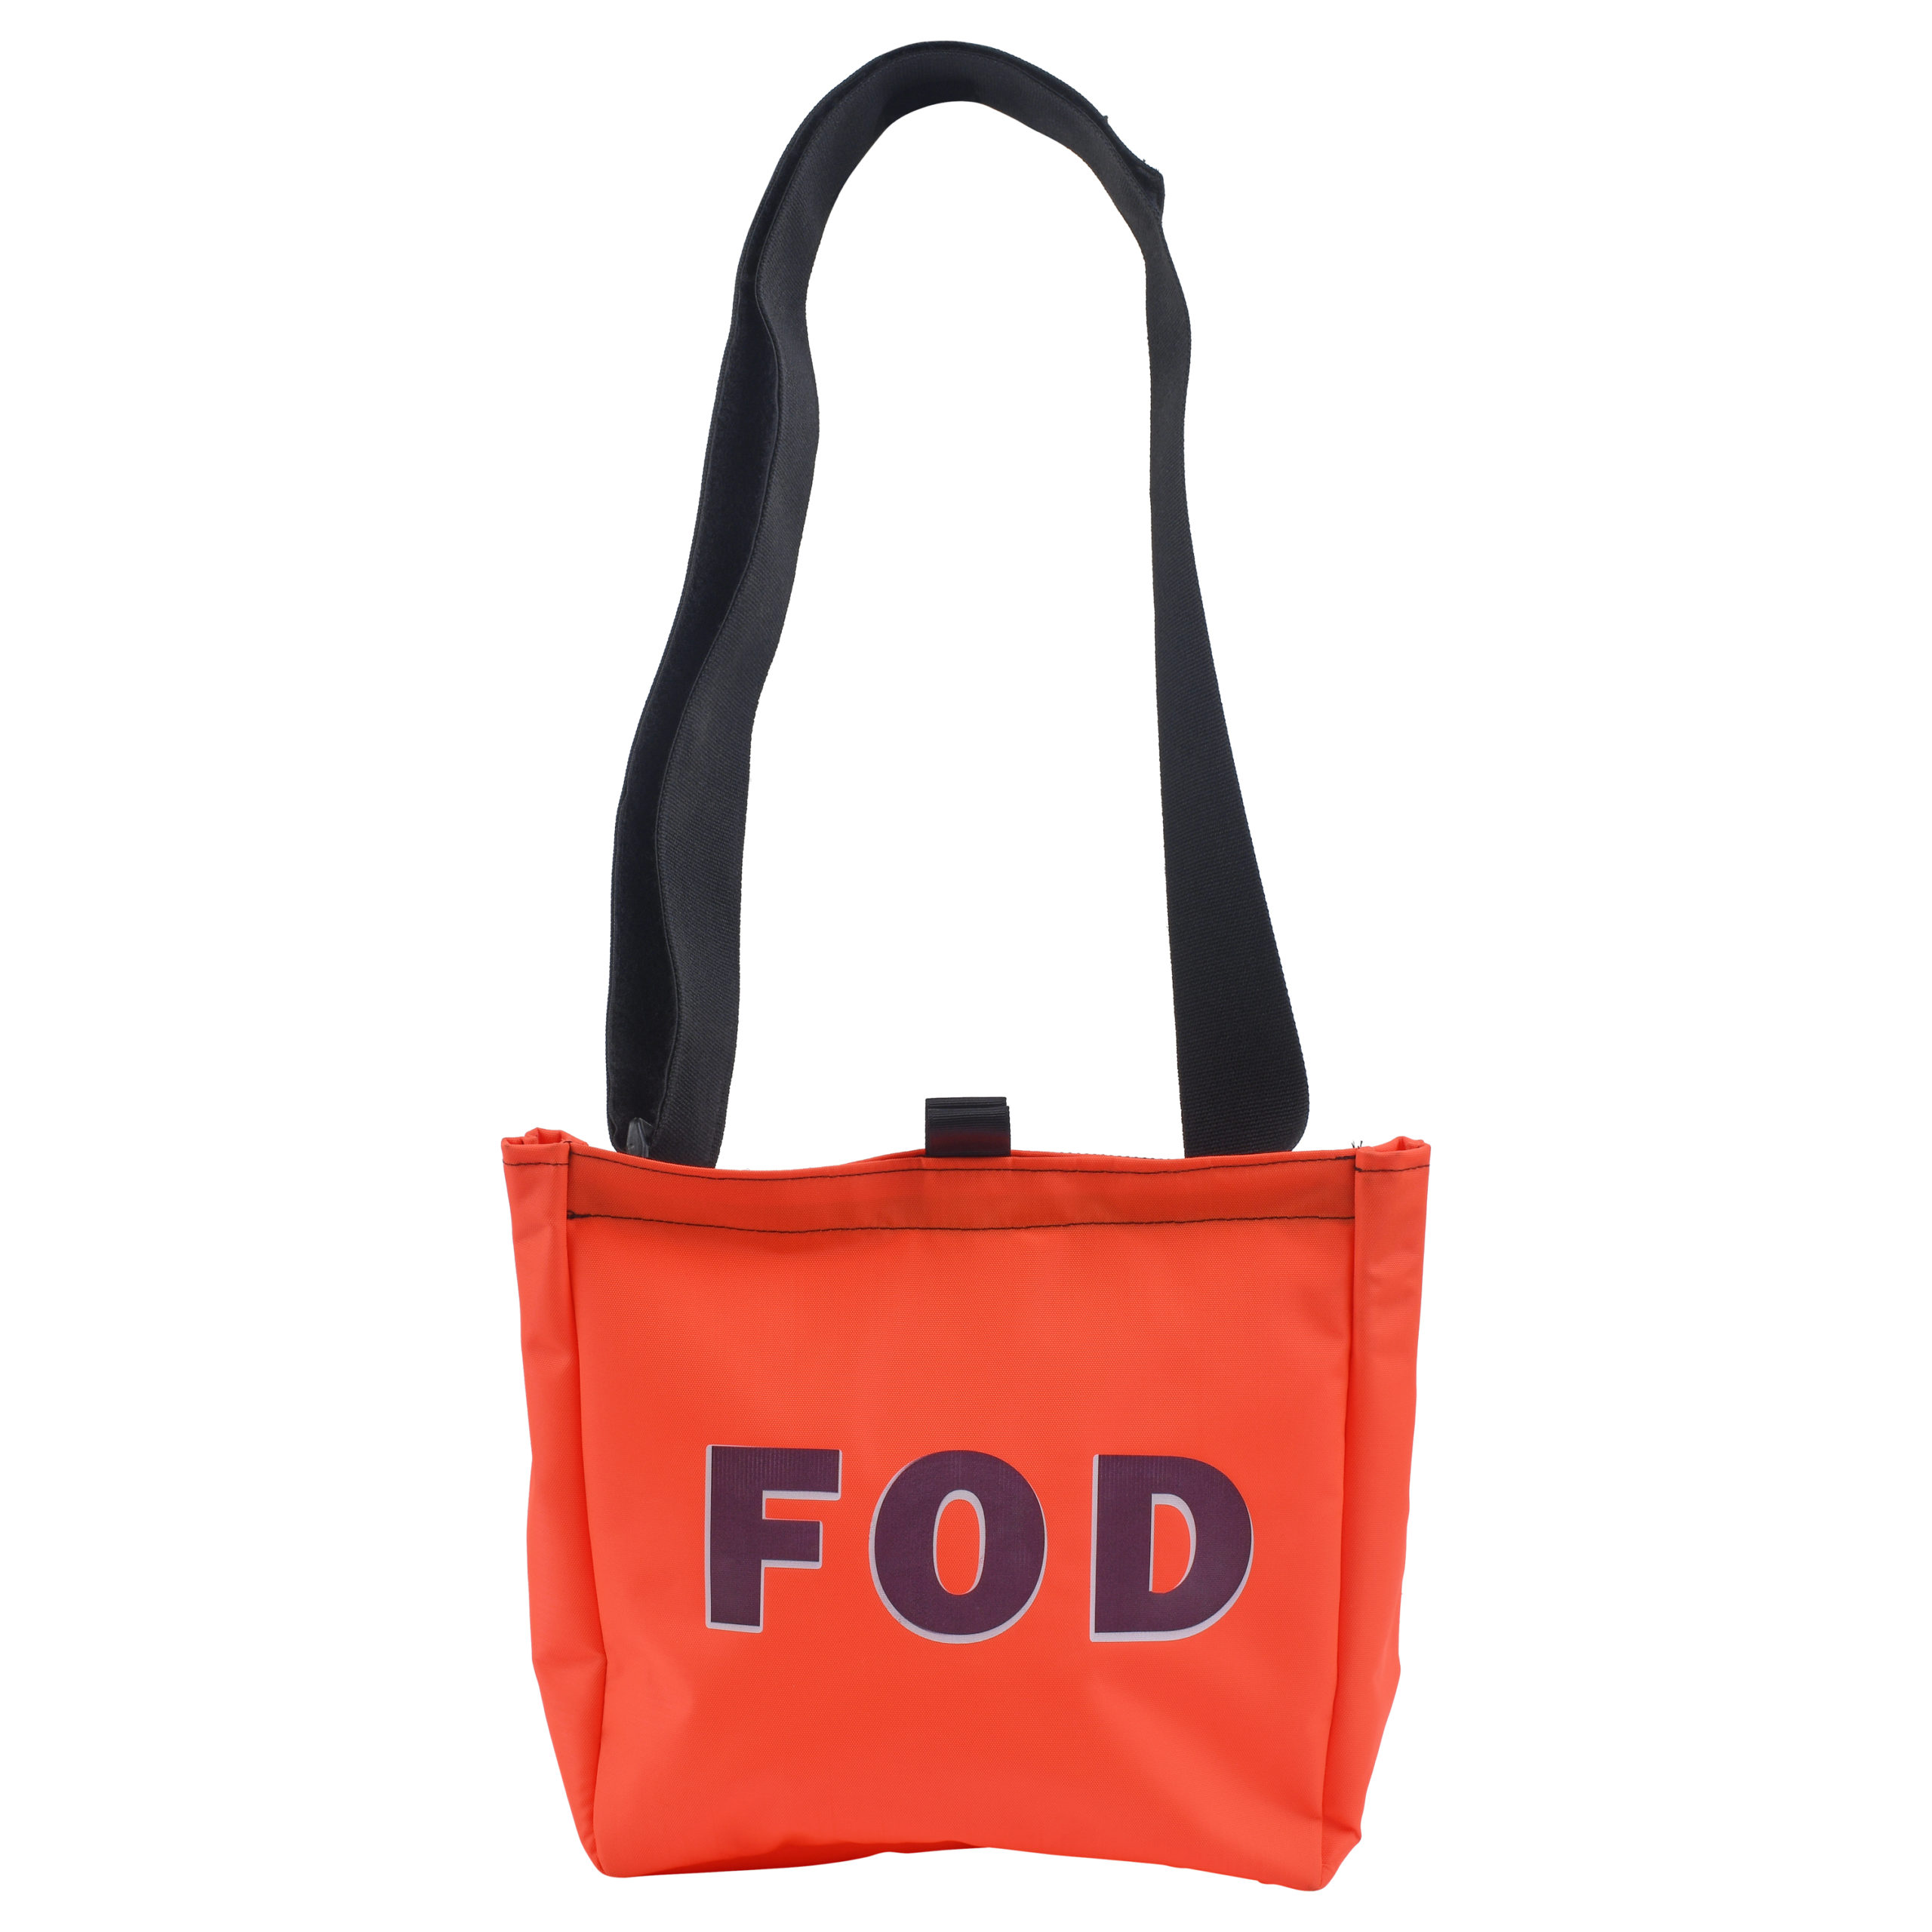 Personal Debris Disposal Bags | The FOD Control Corporation